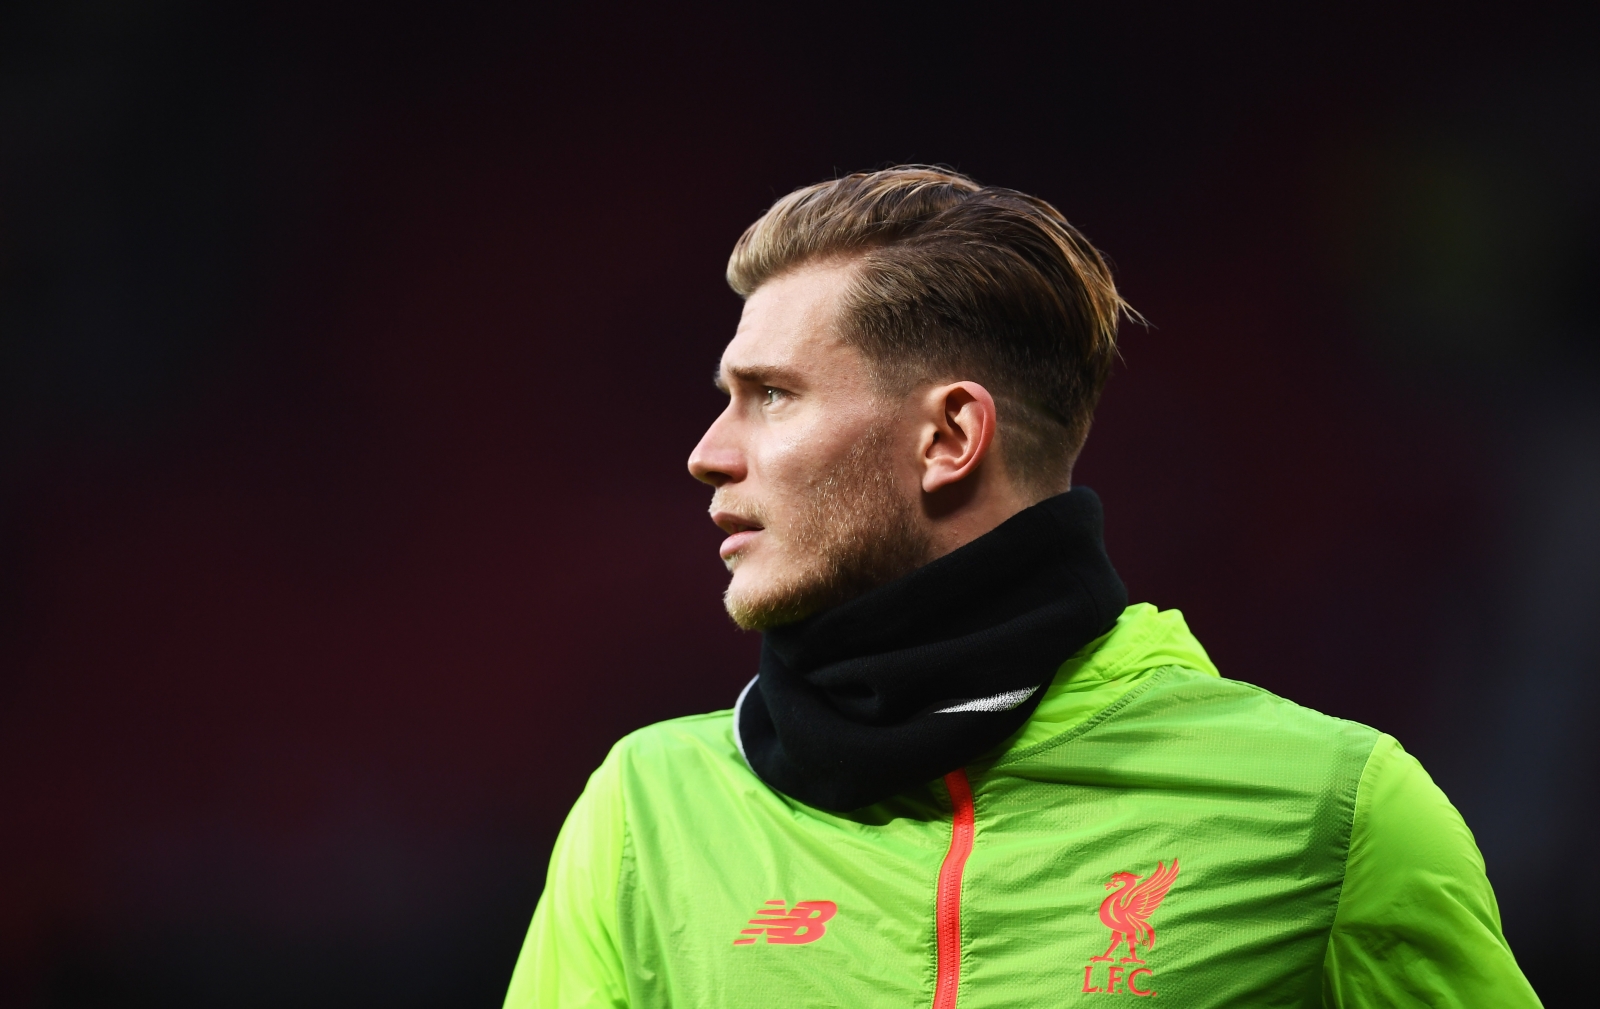 'Absolutely nothing' in Liverpool summer exit rumours, says Loris